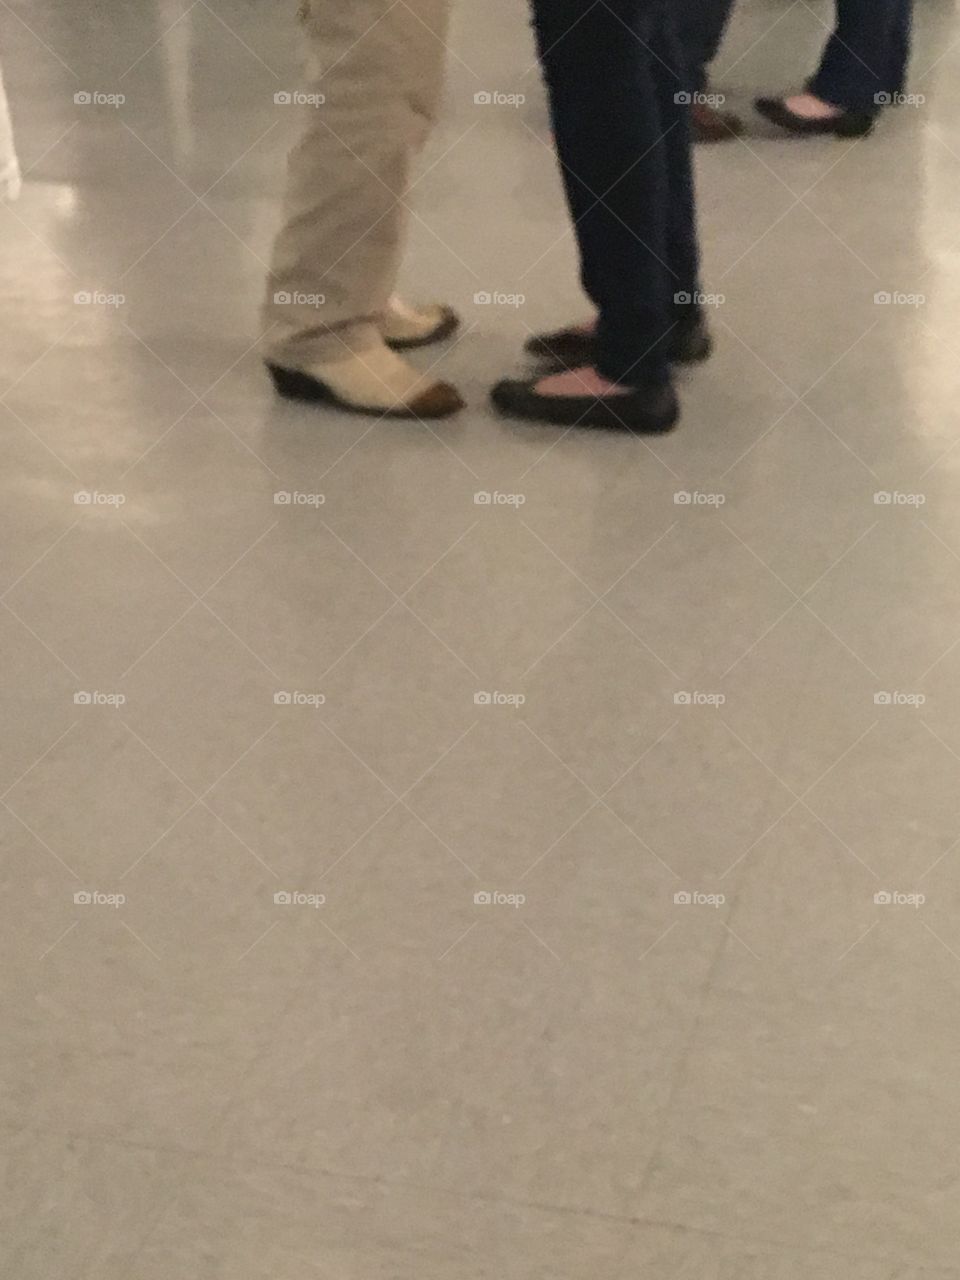 Senior dance at the center here in town. Love the boots on this gents feet. Cute couple.